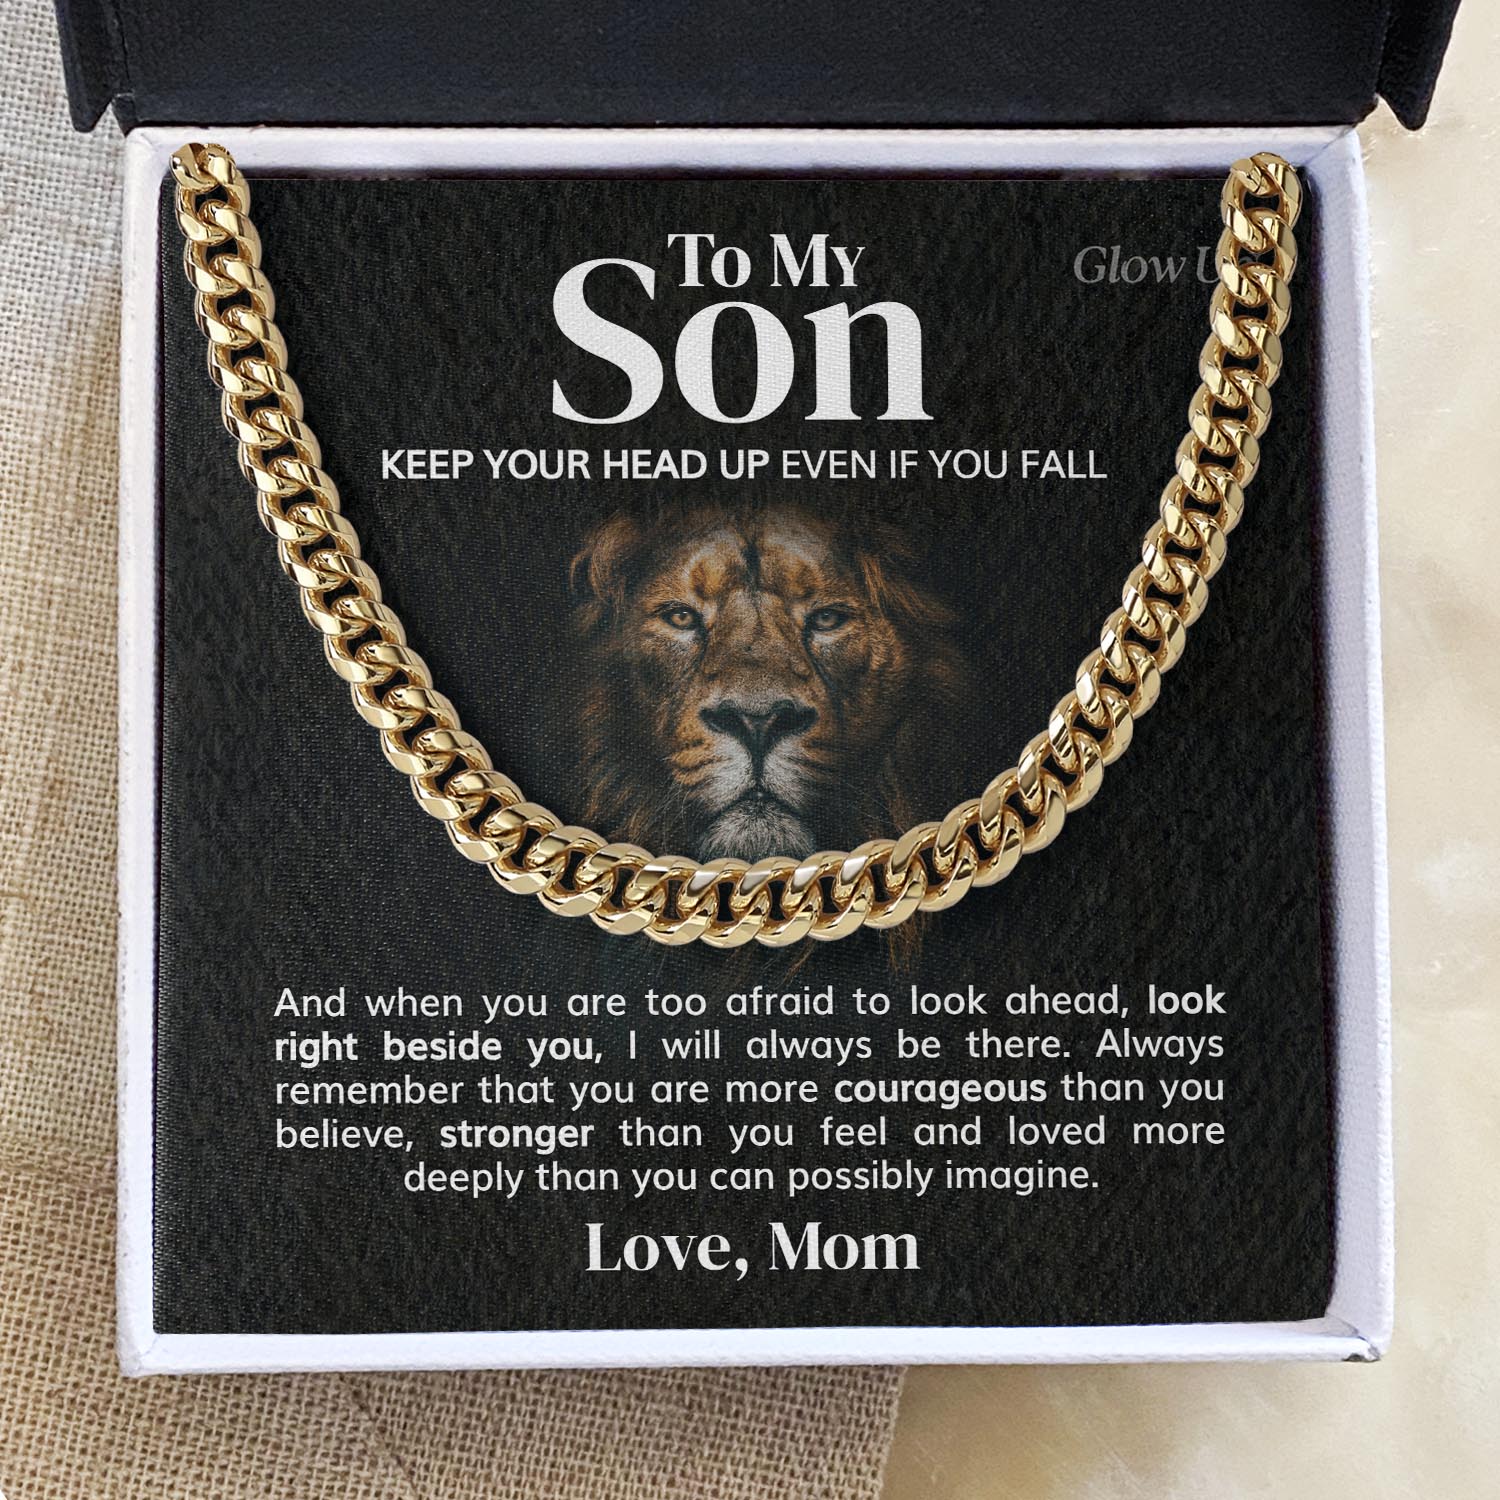 ShineOn Fulfillment Jewelry 14K Yellow Gold Finish / Two-Toned Box To my Son - Keep your head up my son - Cuban Link Chain Necklace